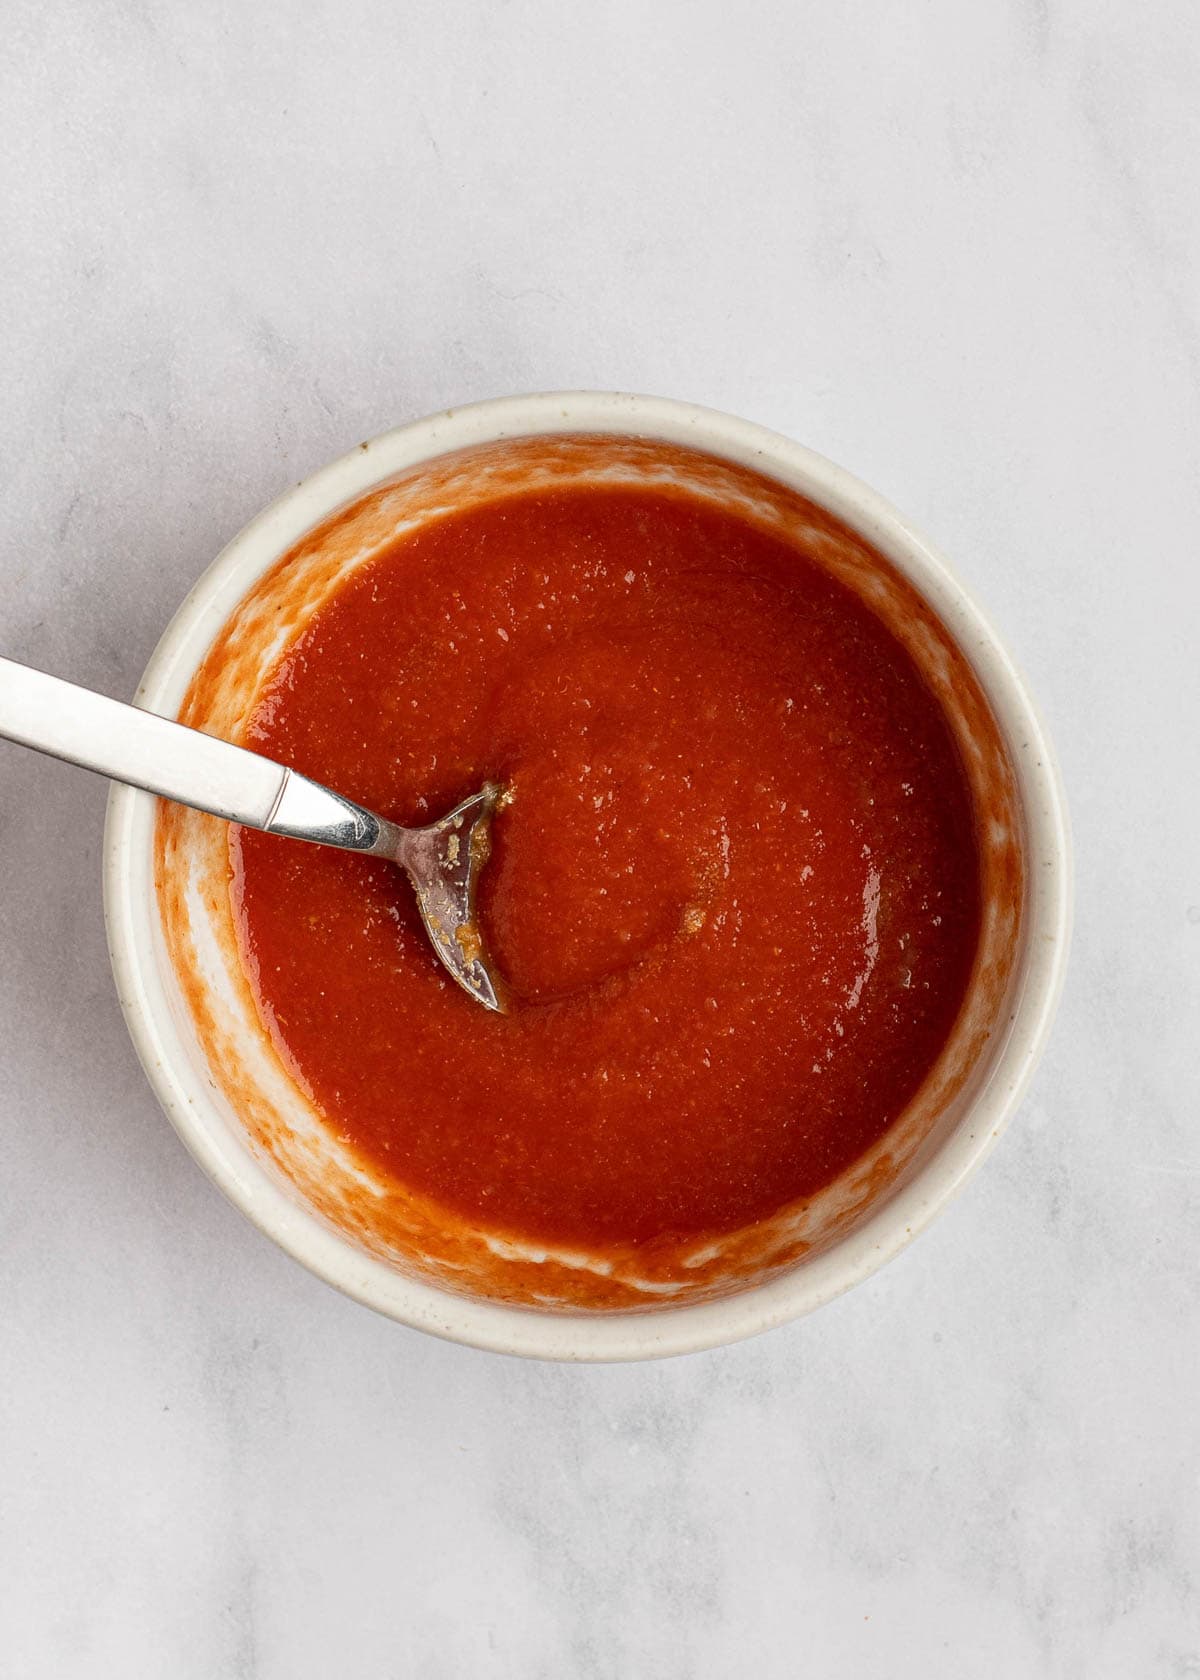 Overhead view of a bowl with a tomato-based sauce and a spoon in it